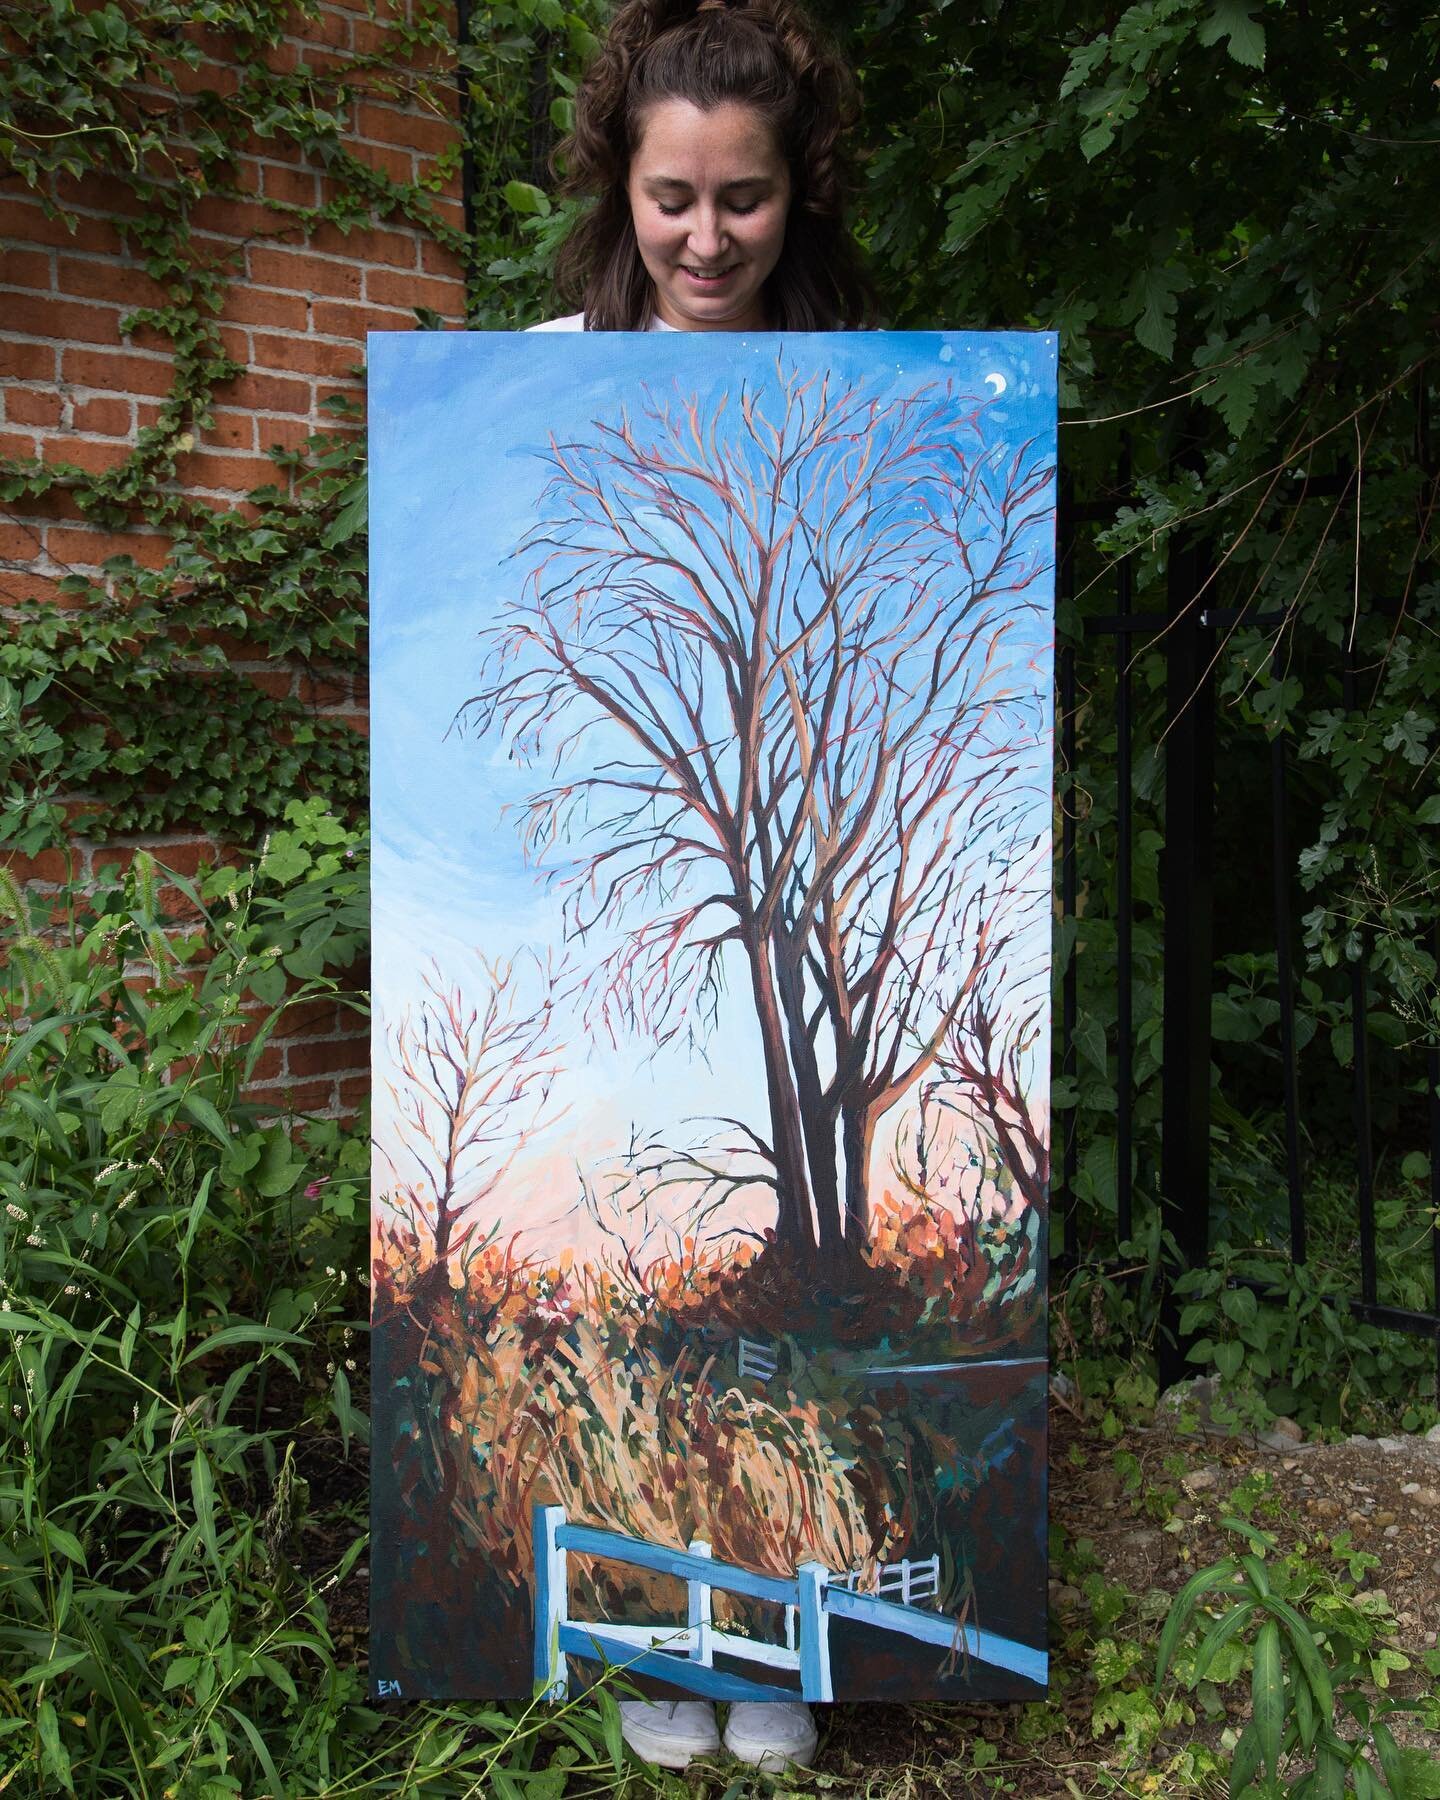 &ldquo;Consistency,&rdquo; 20&rdquo; x 48&rdquo;
$850 or $980 with a custom frame by @angellrestoration 

Contact to purchase!

#sunset #sunsetpainting #duskpainting #earlyspring #naturelovers #indianapolis #indianapoliswestside #riversidegolfacademy